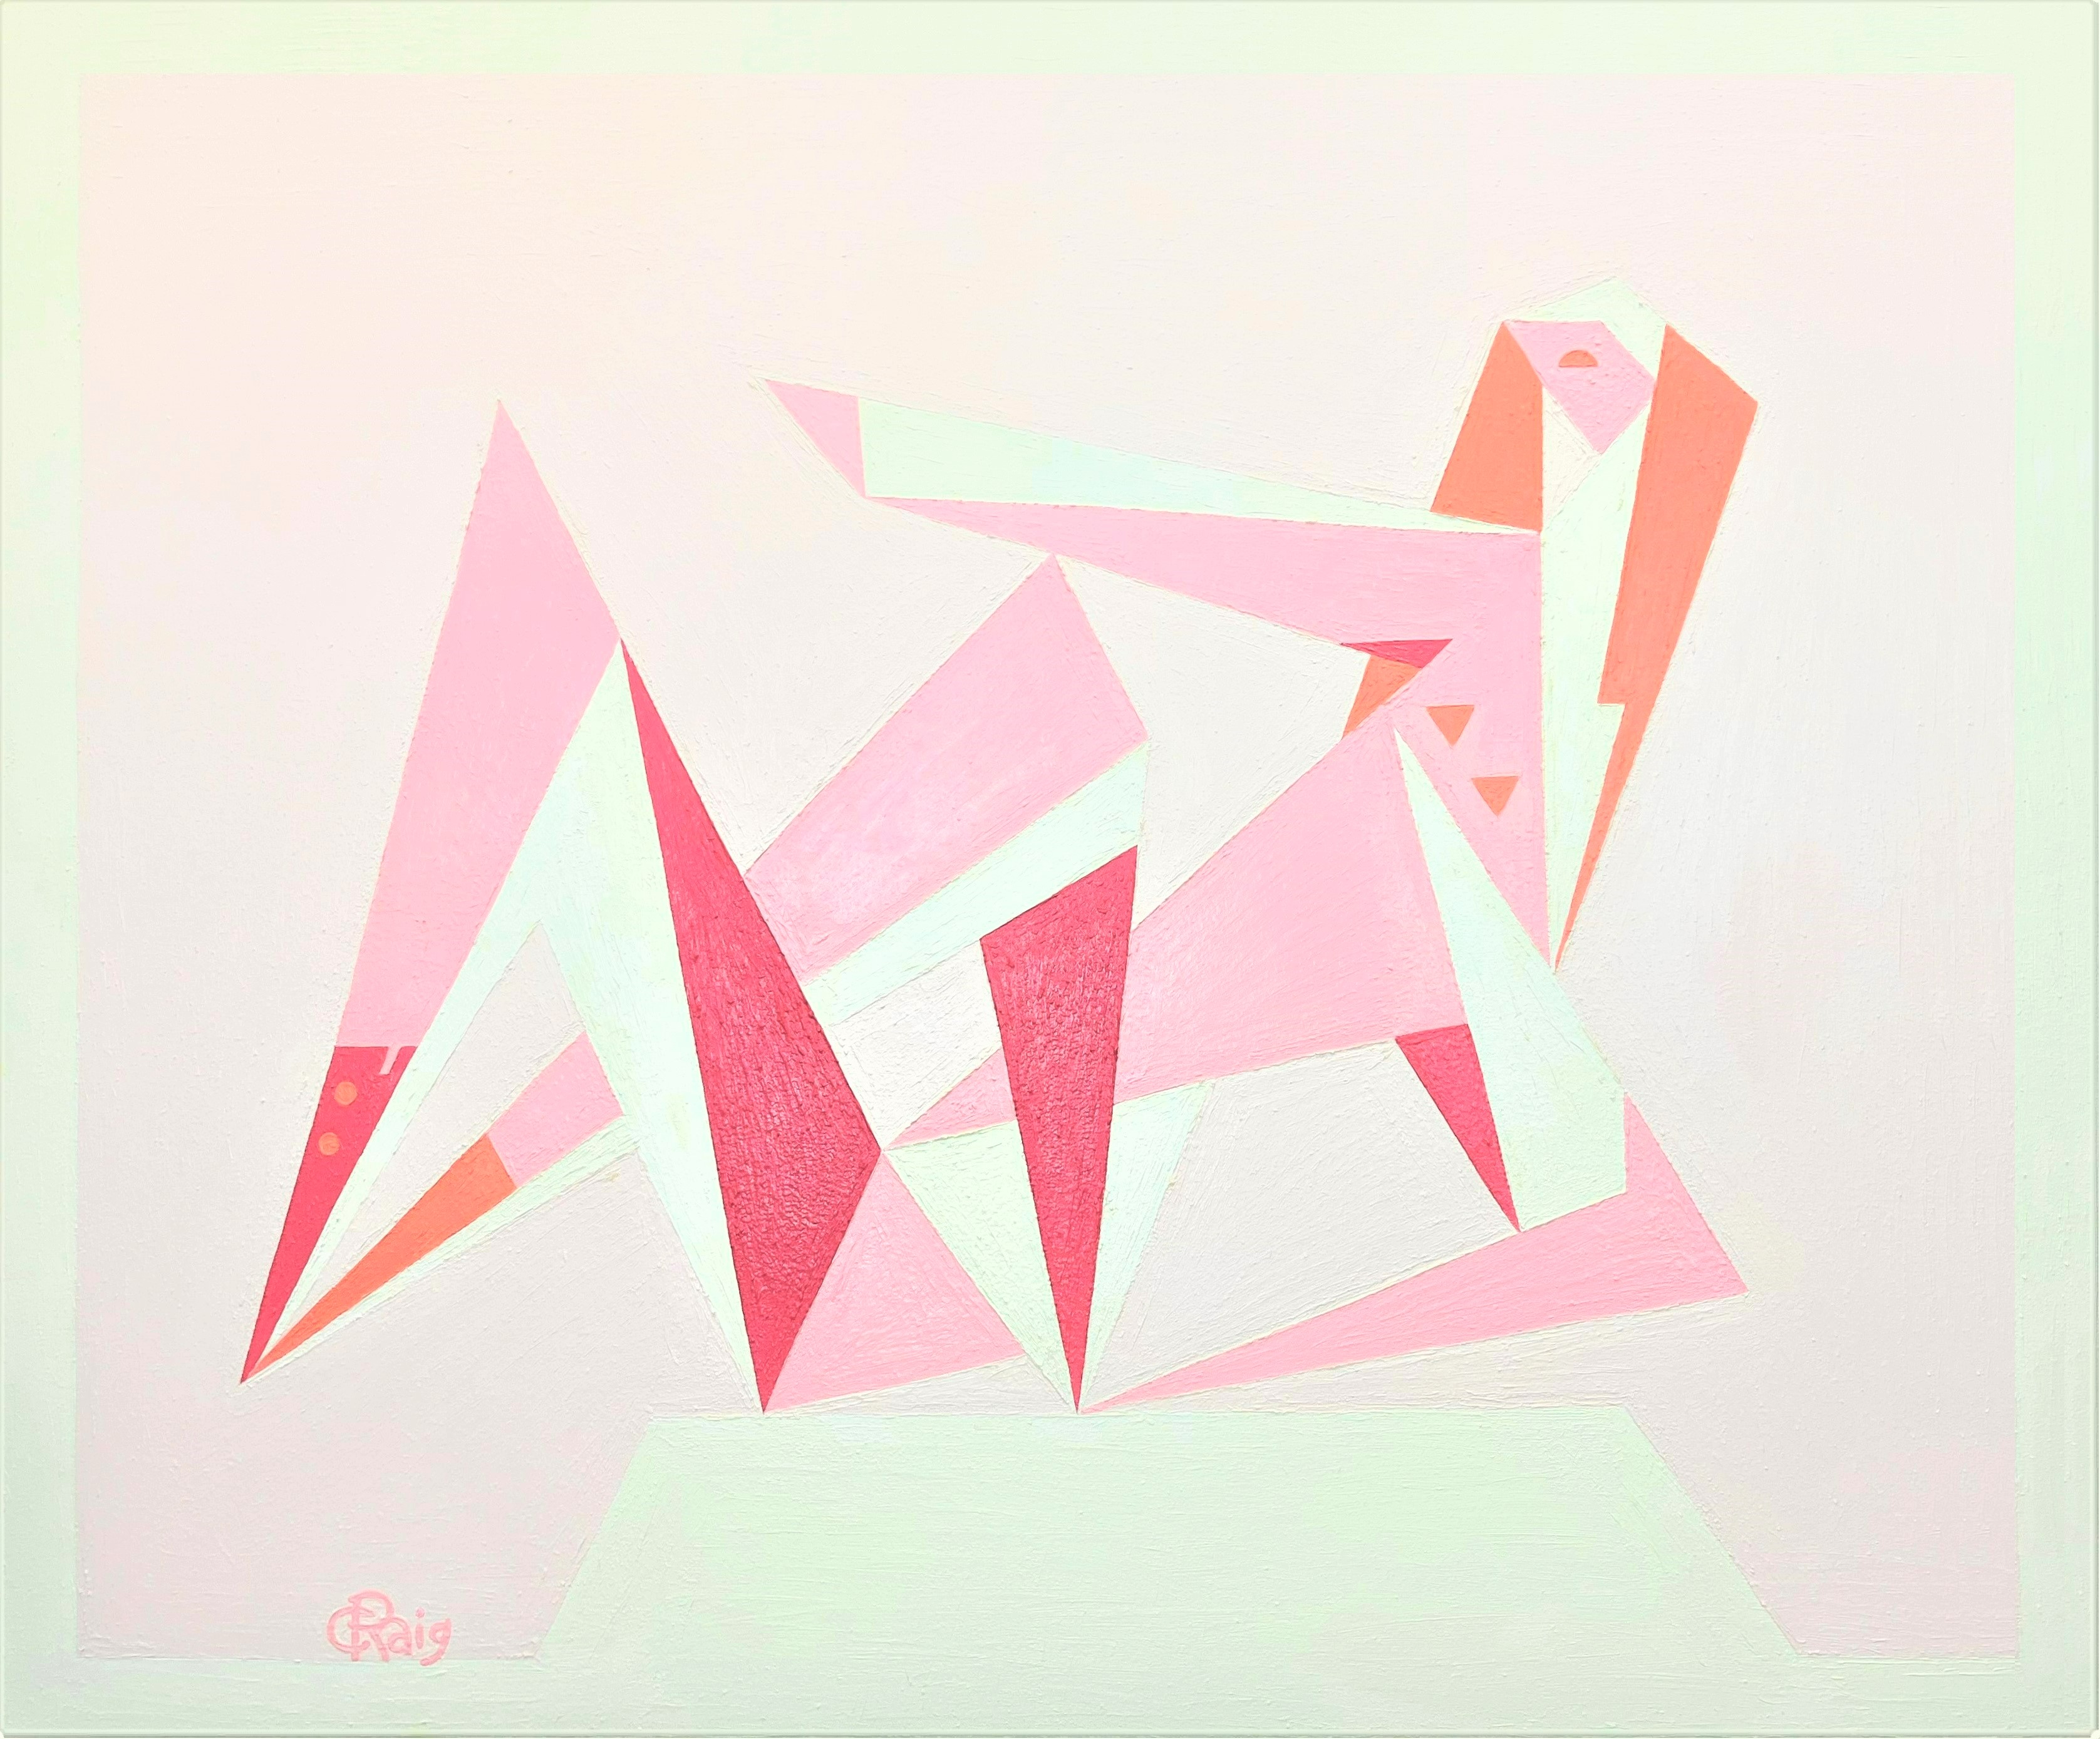 Painting: ON A PEDESTAL, 50 by 60 inches